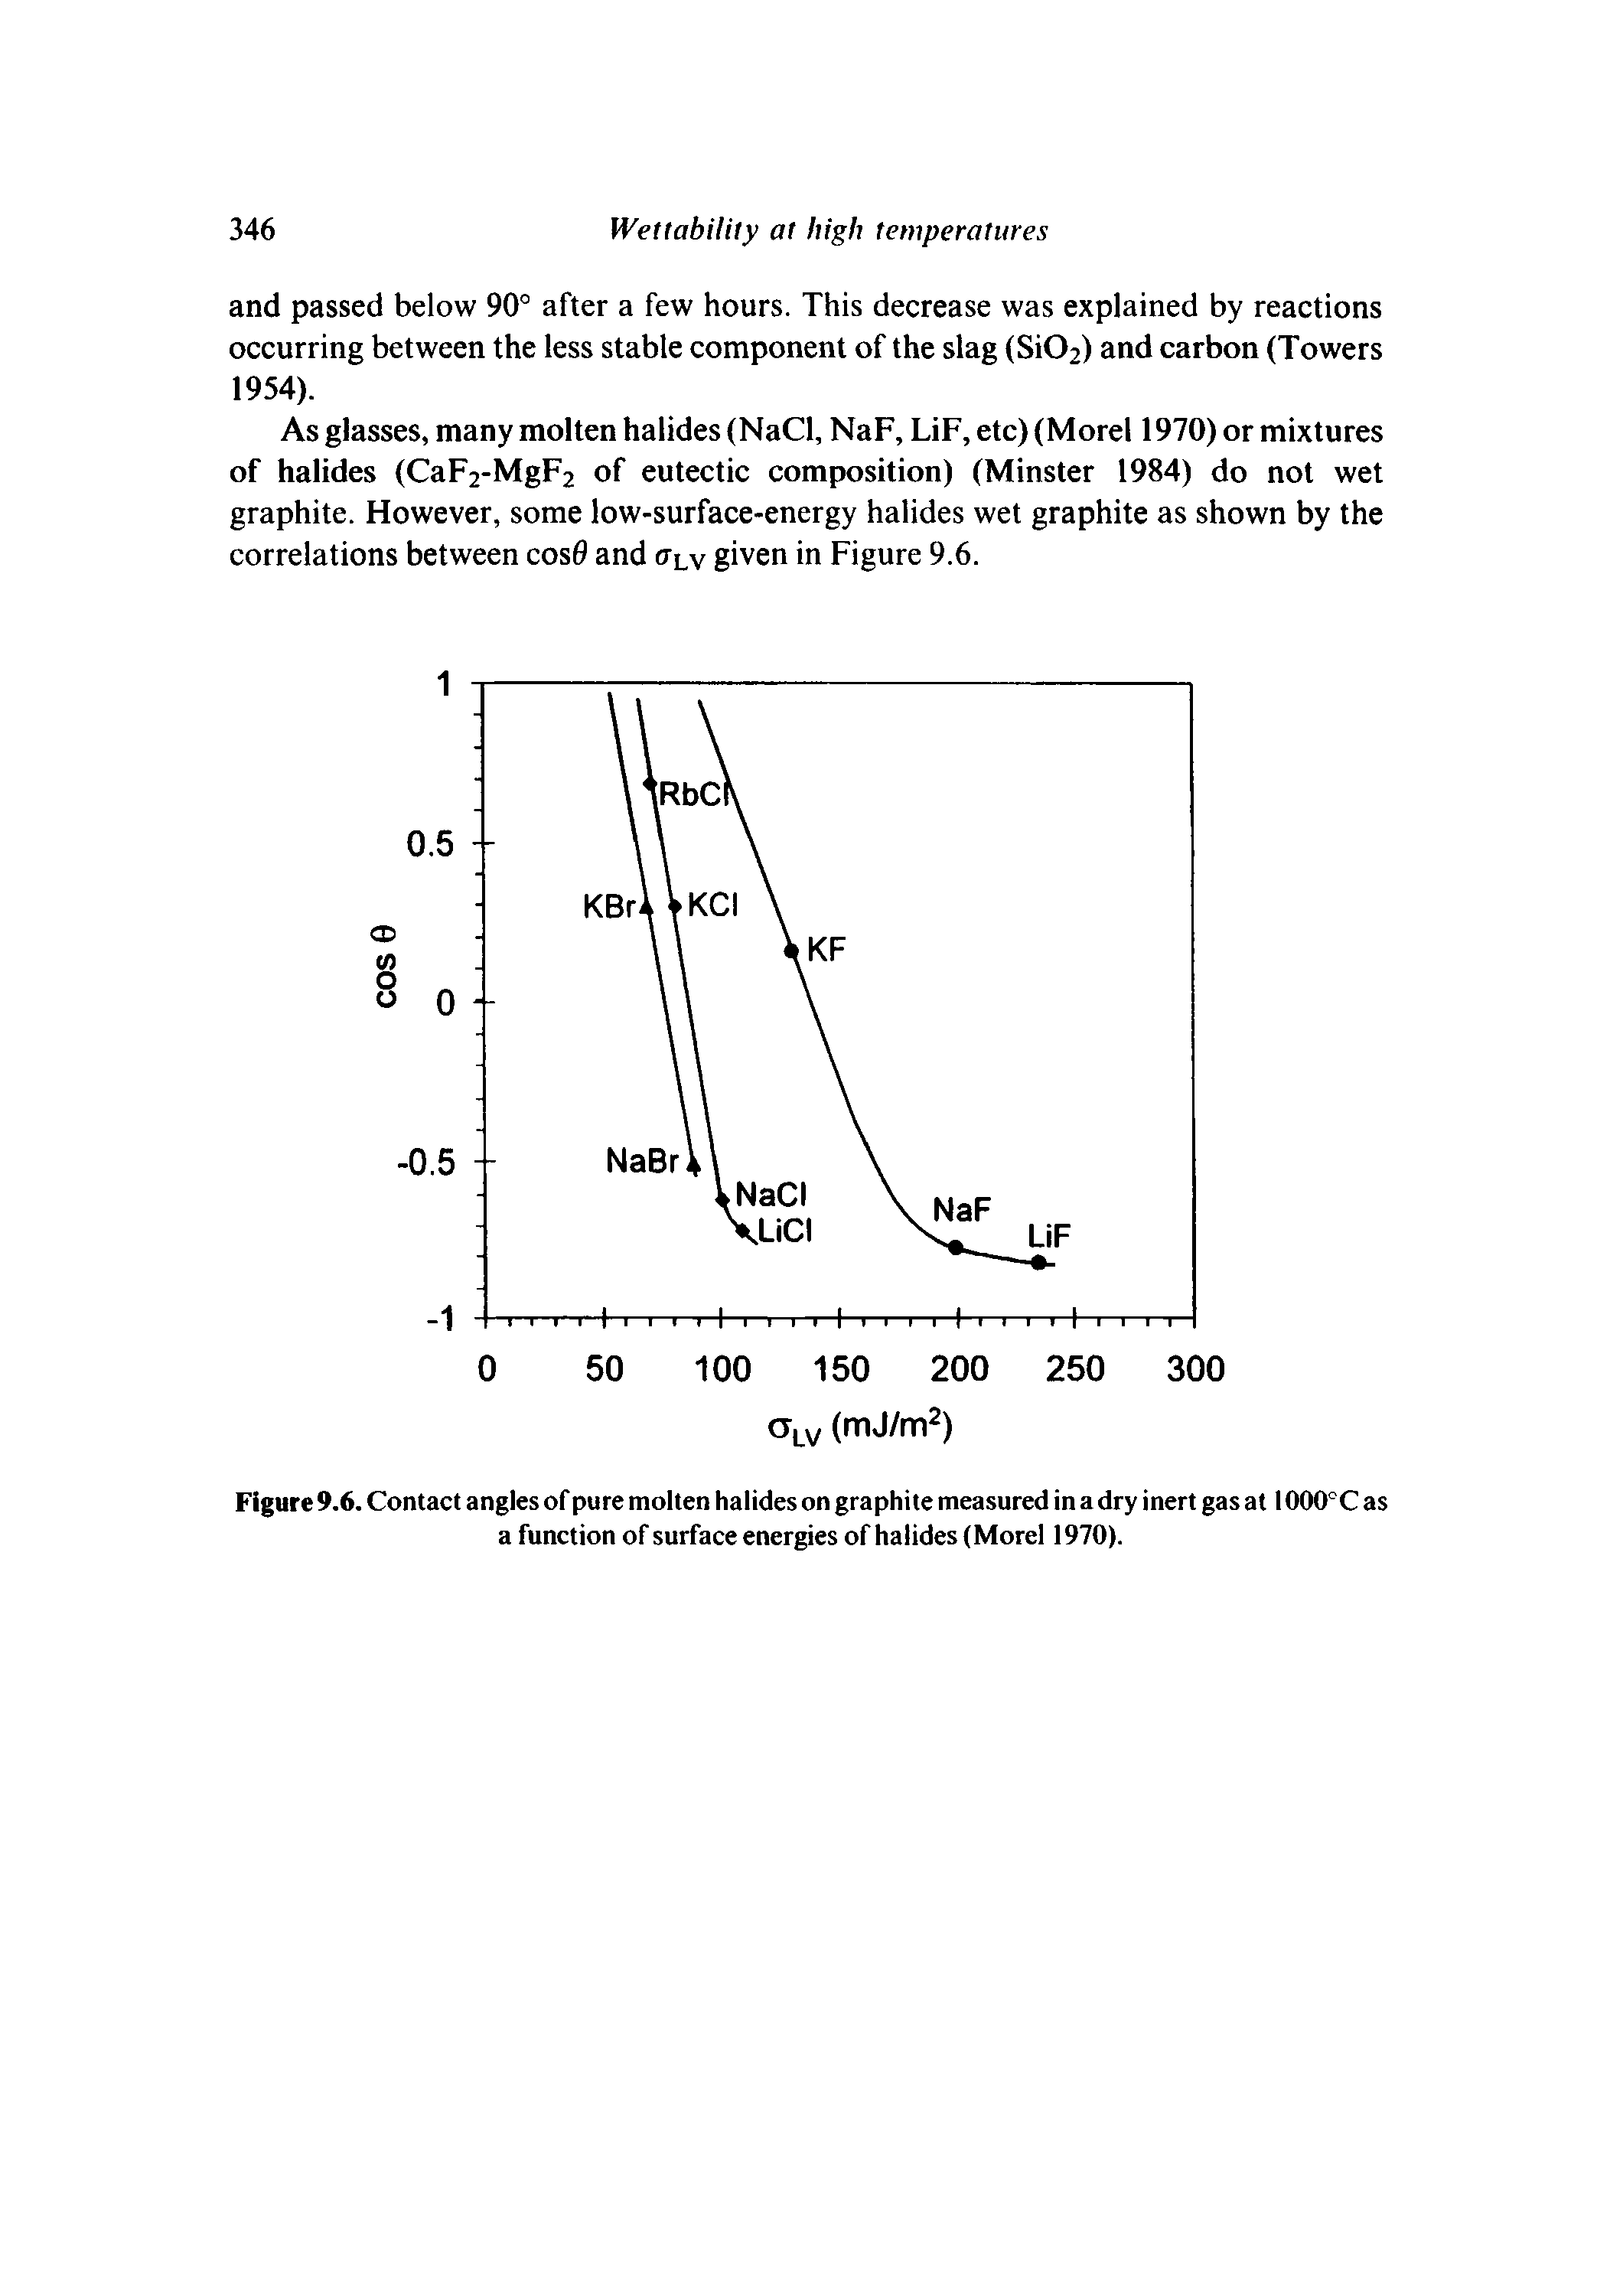 Figure 9.6. Contact angles of pure molten halides on graphite measured in a dry inert gas at 1000 C as a function of surface energies of halides (Morel 1970).